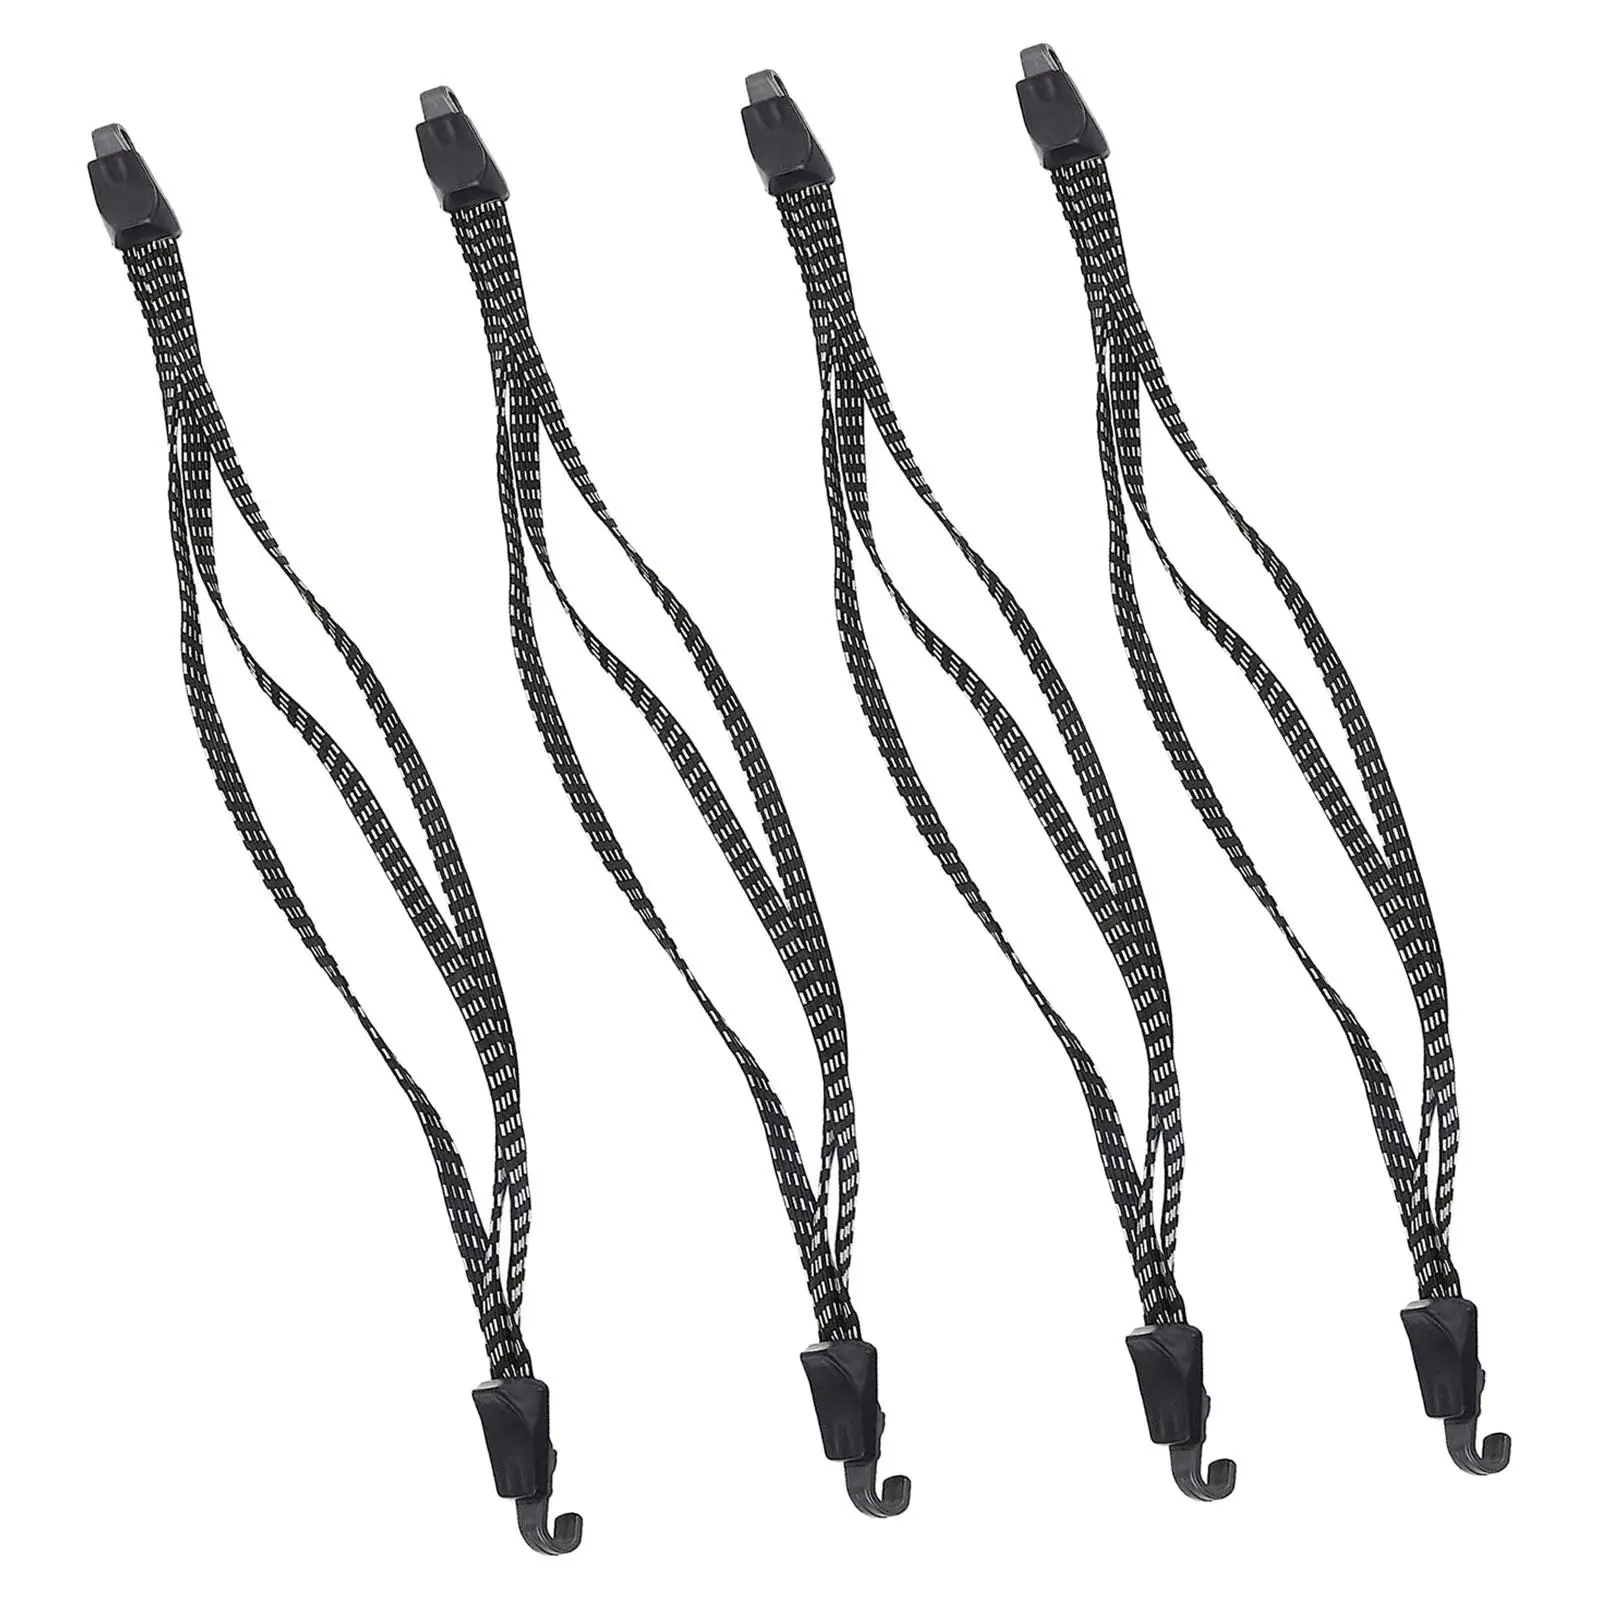 4Pcs Motorcycle Luggage Rack Straps Universal Luggage Belt Heavy Duty Outdoor Bungee Cords with Hooks for Transporting Cargo RV